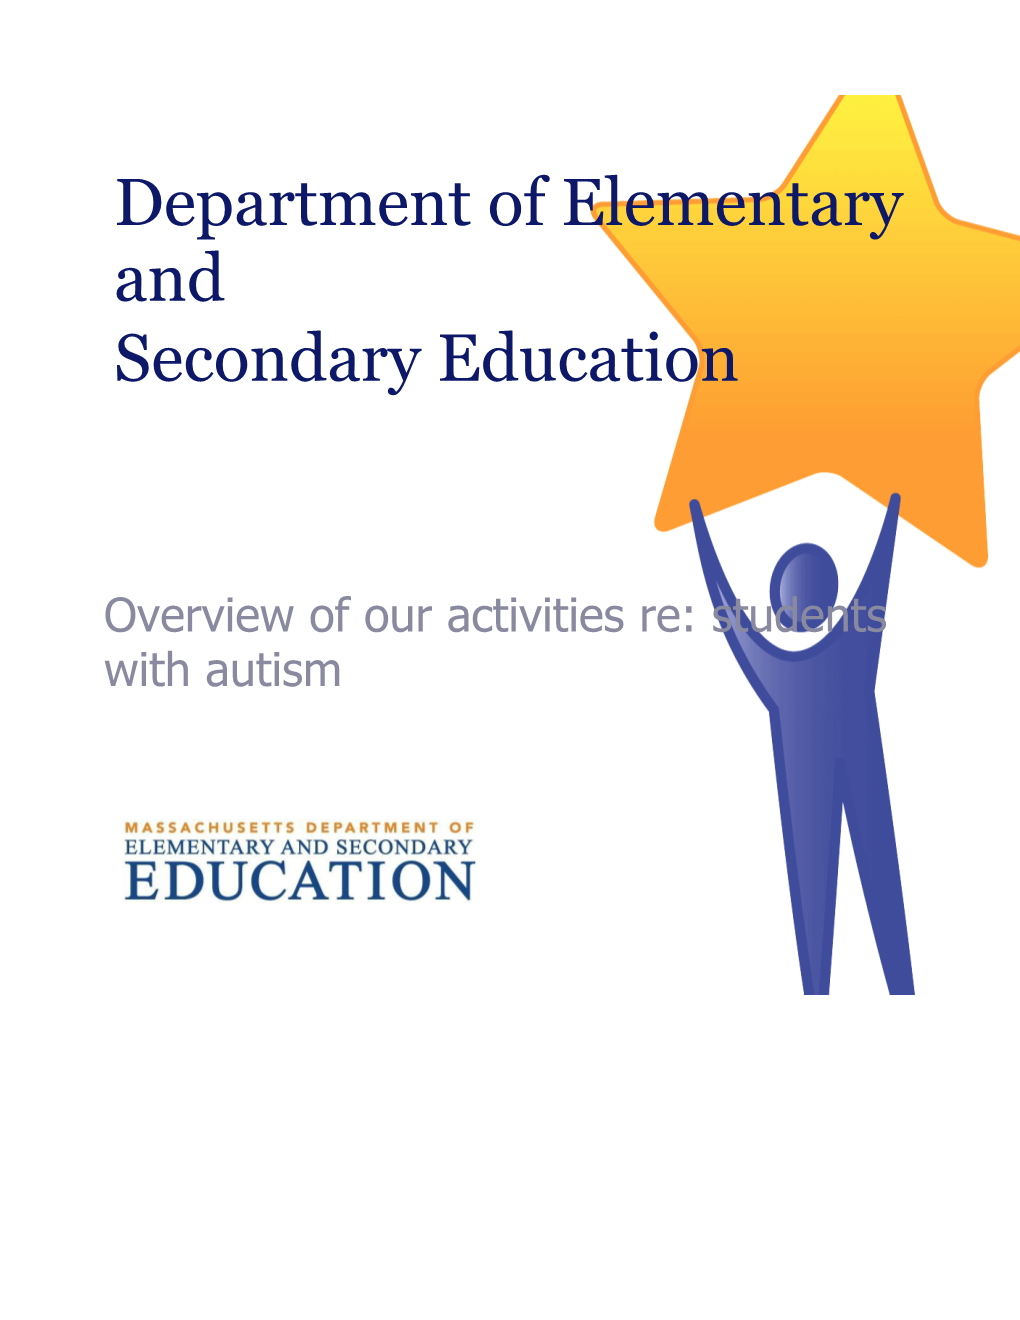 Department of Elementary and Secondary Education